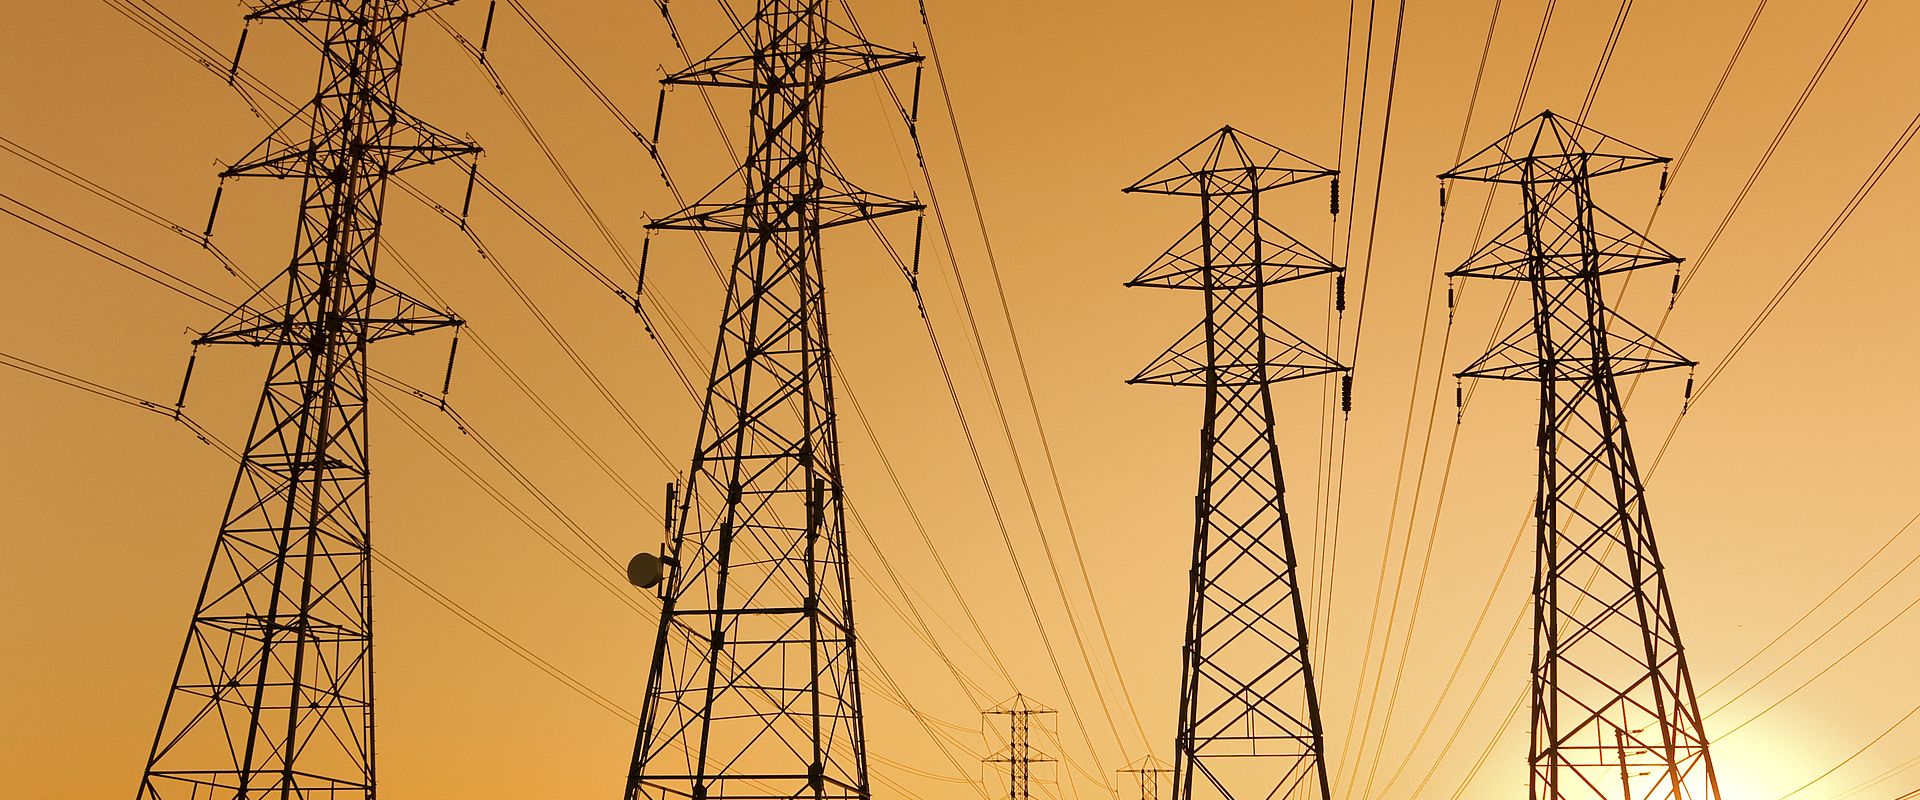 Image showing electrical pylons and power lines